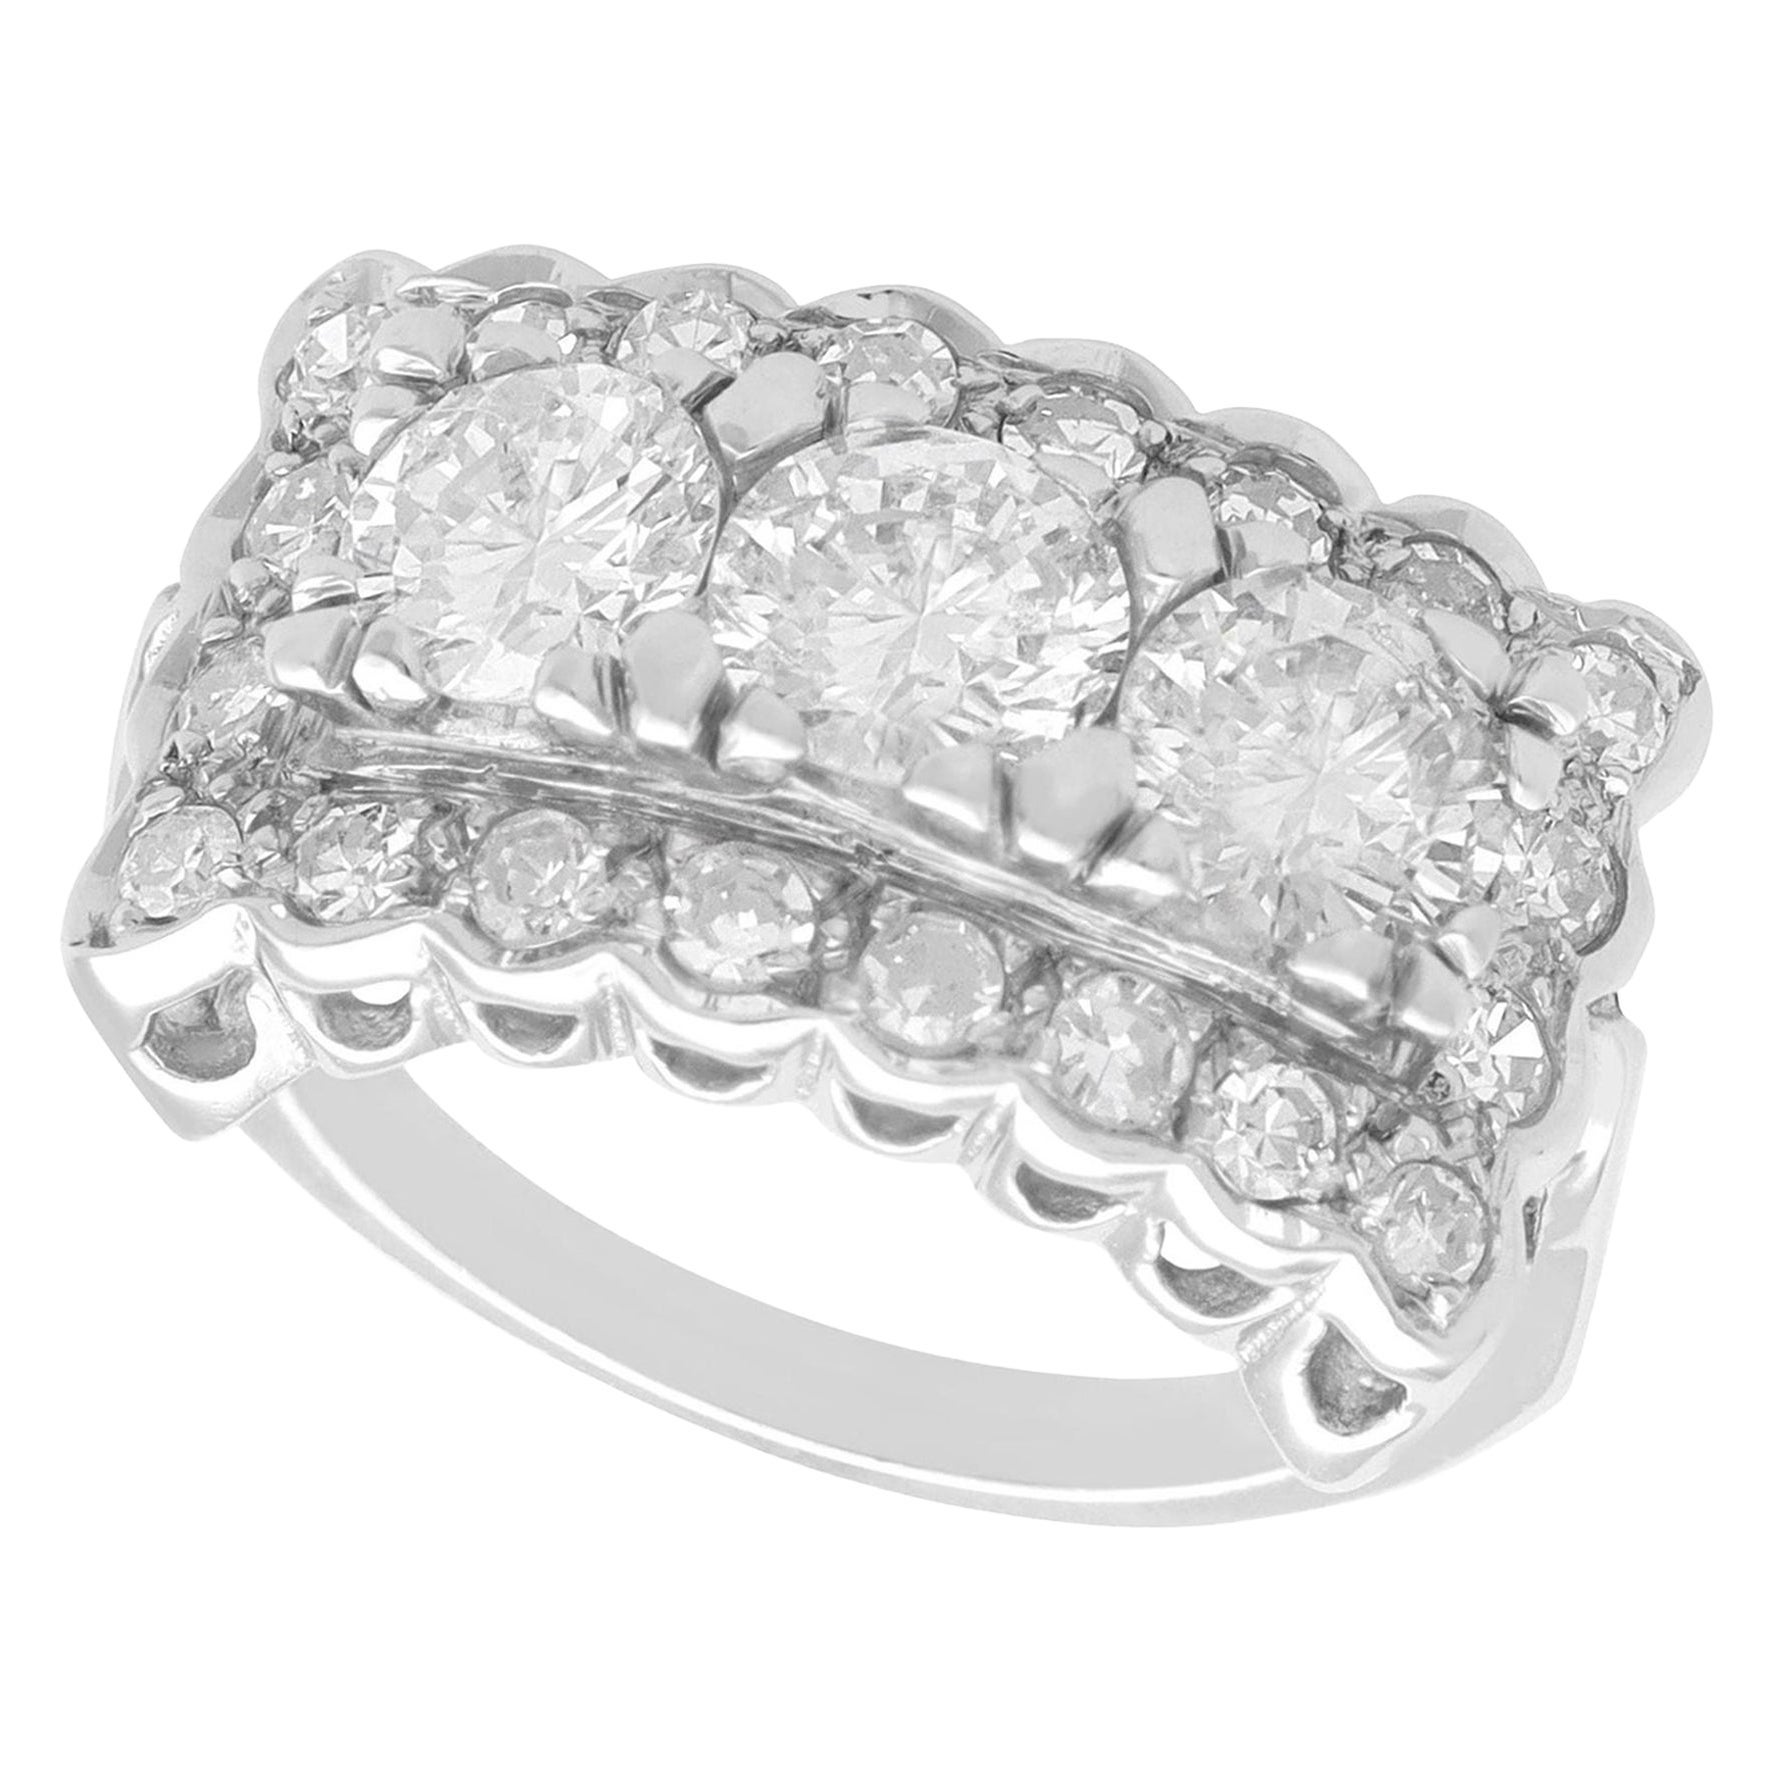 Vintage 2.20 Carat Diamond and White Gold Cluster Ring, circa 1955 For Sale